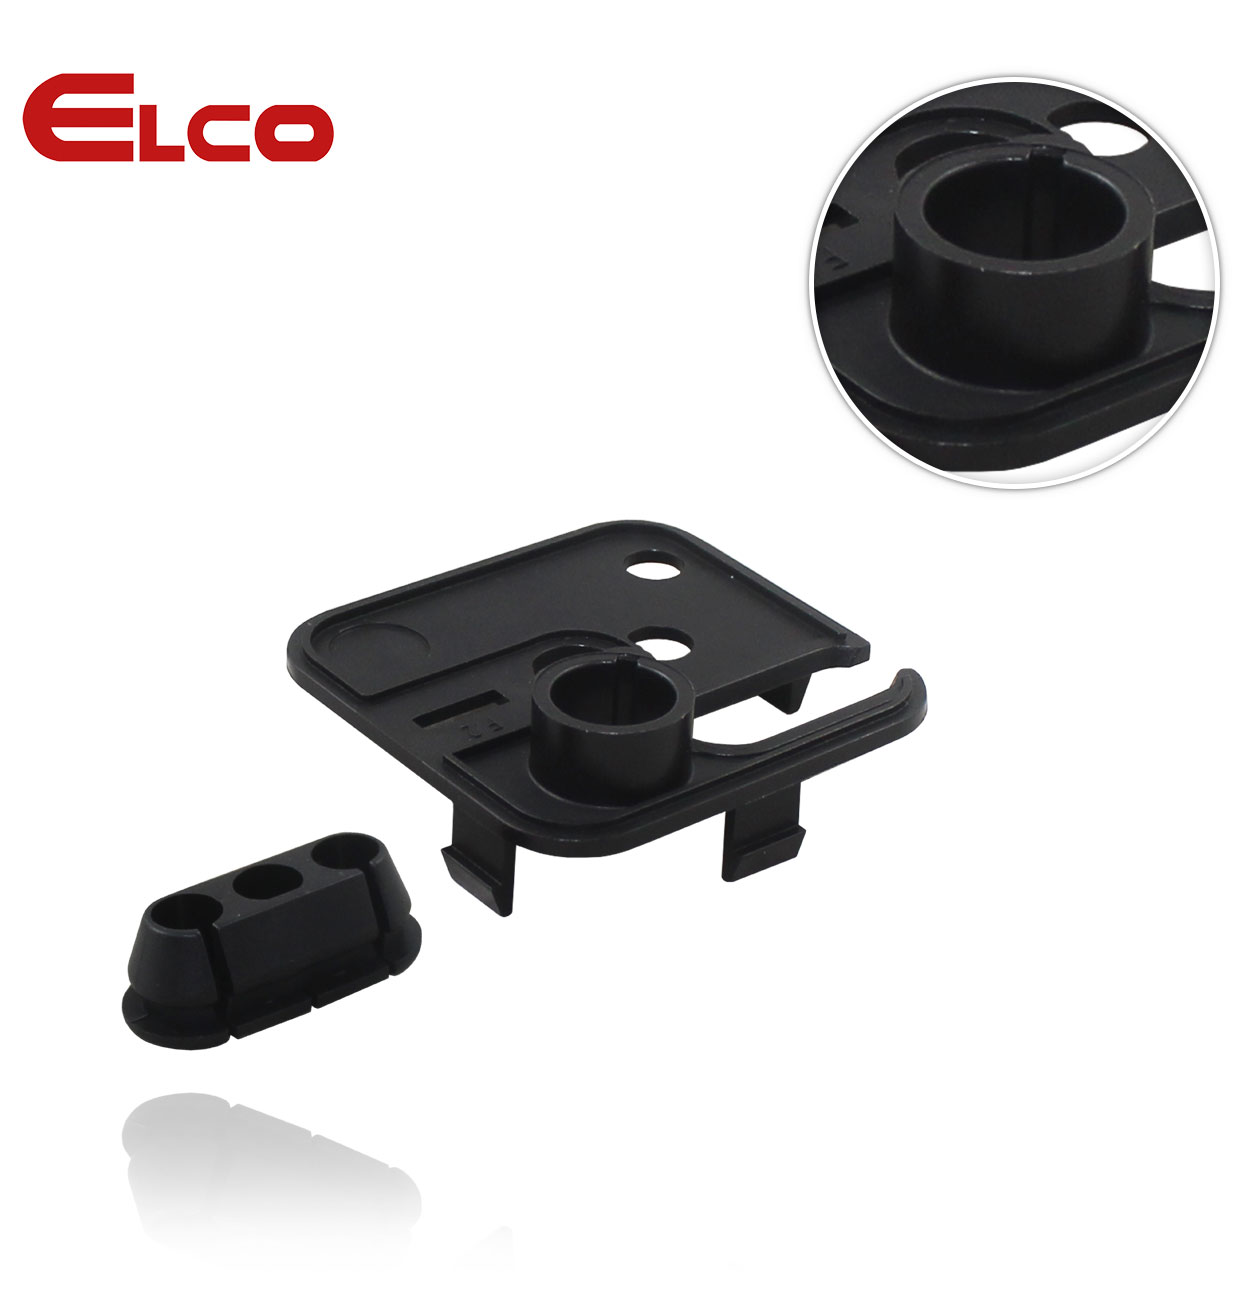 ELCO PHOTOCELL SUPPORT PLATE